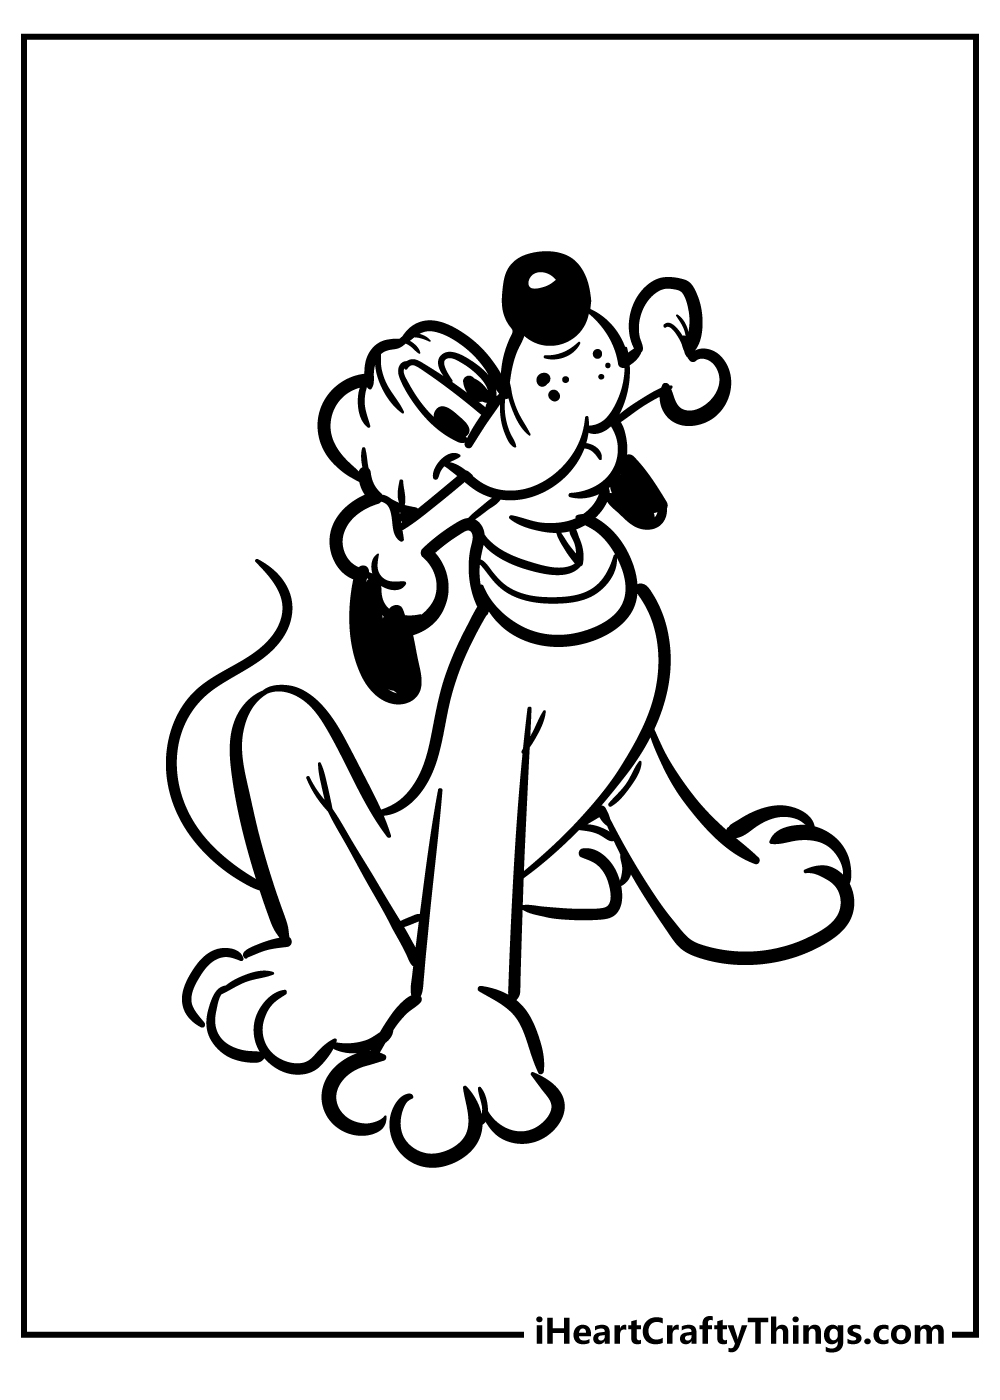 Pluto Coloring Sheet for children free download